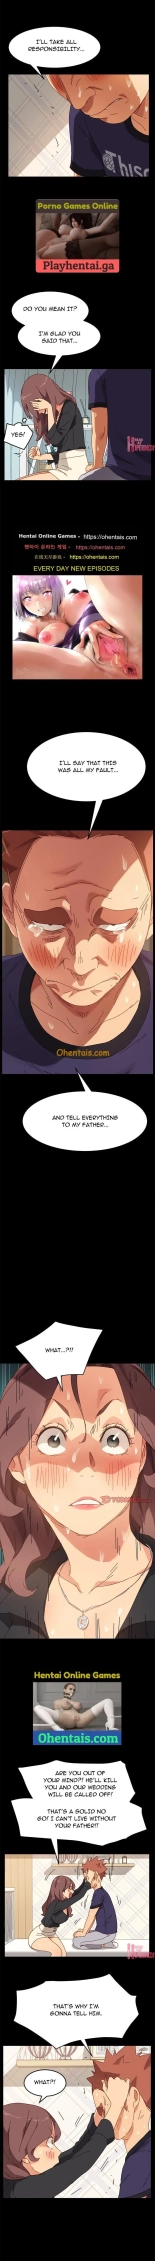 The Perfect Roommates Ch. 12-14 : page 22